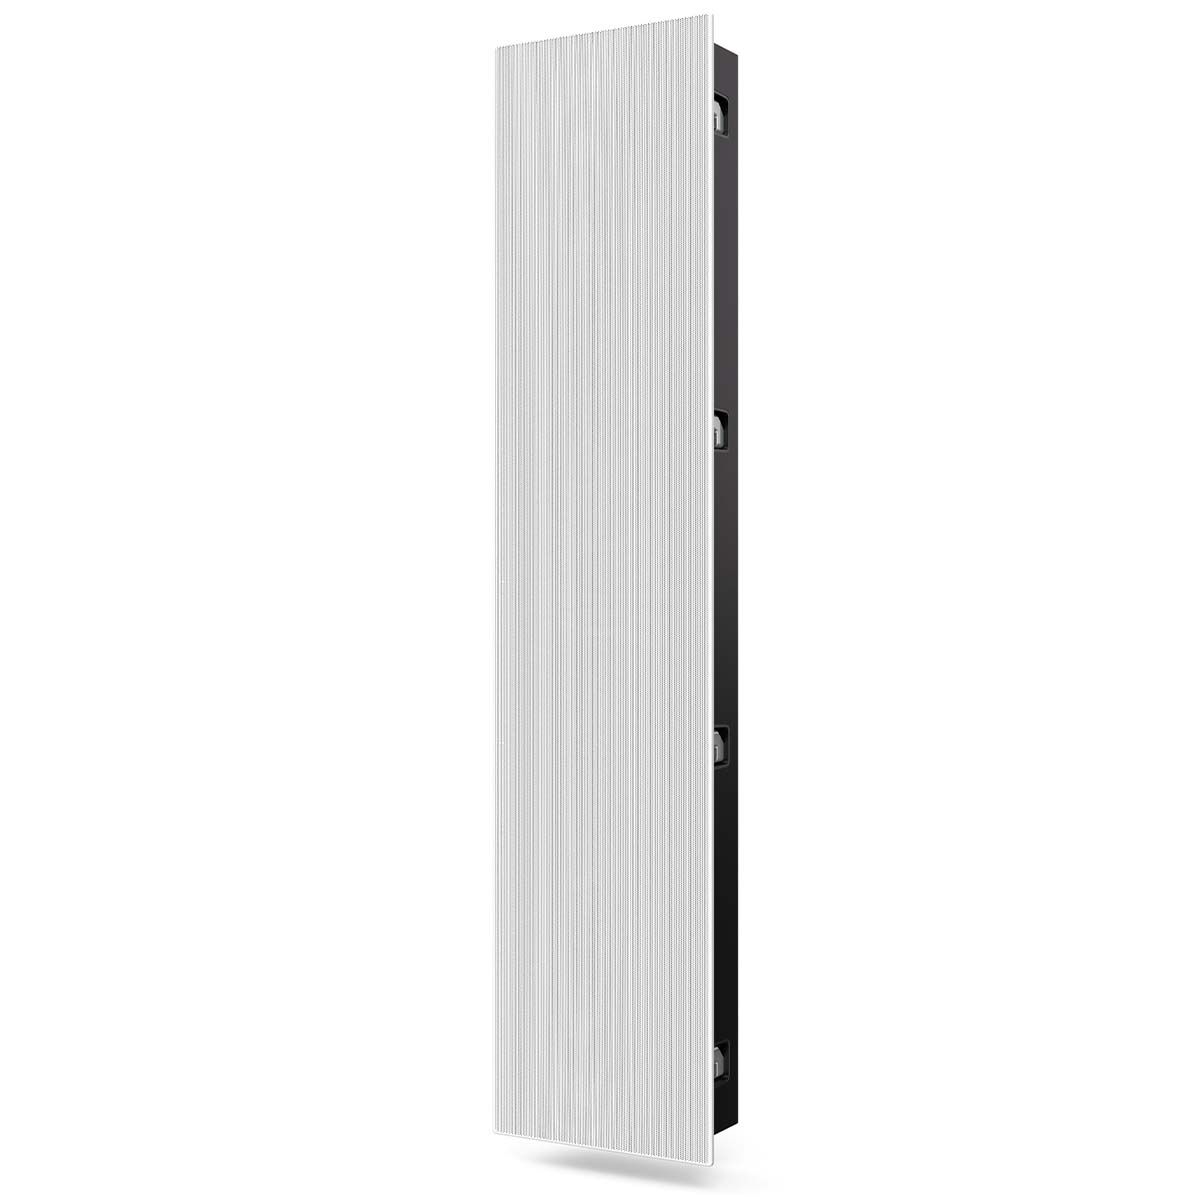 MartinLogan Monument 7XW on white background with white grille